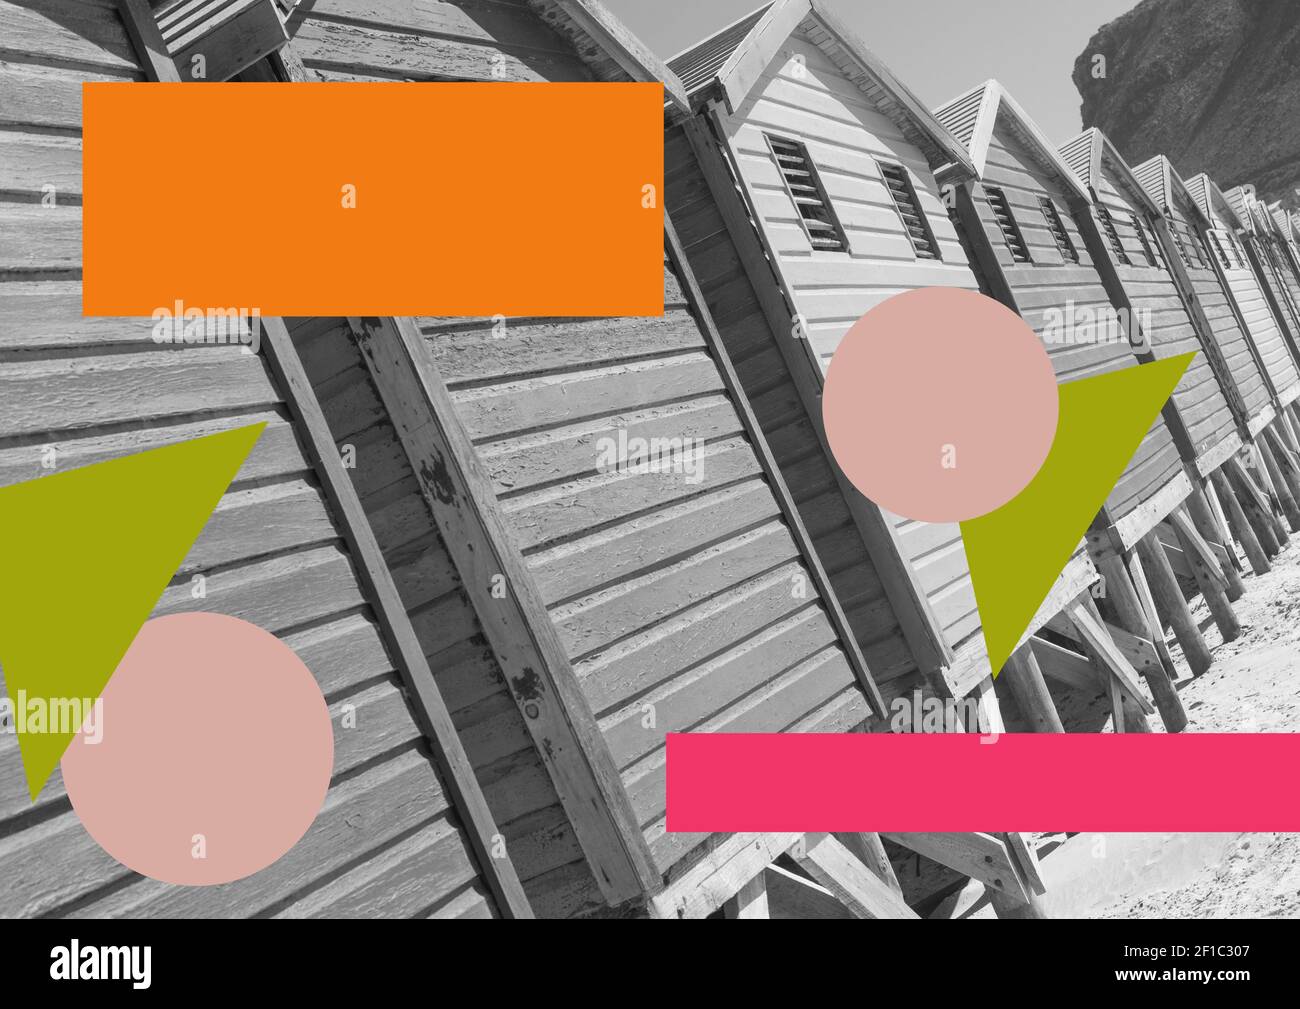 Composition of black and white image of beach huts with colourful geometric shapes Stock Photo